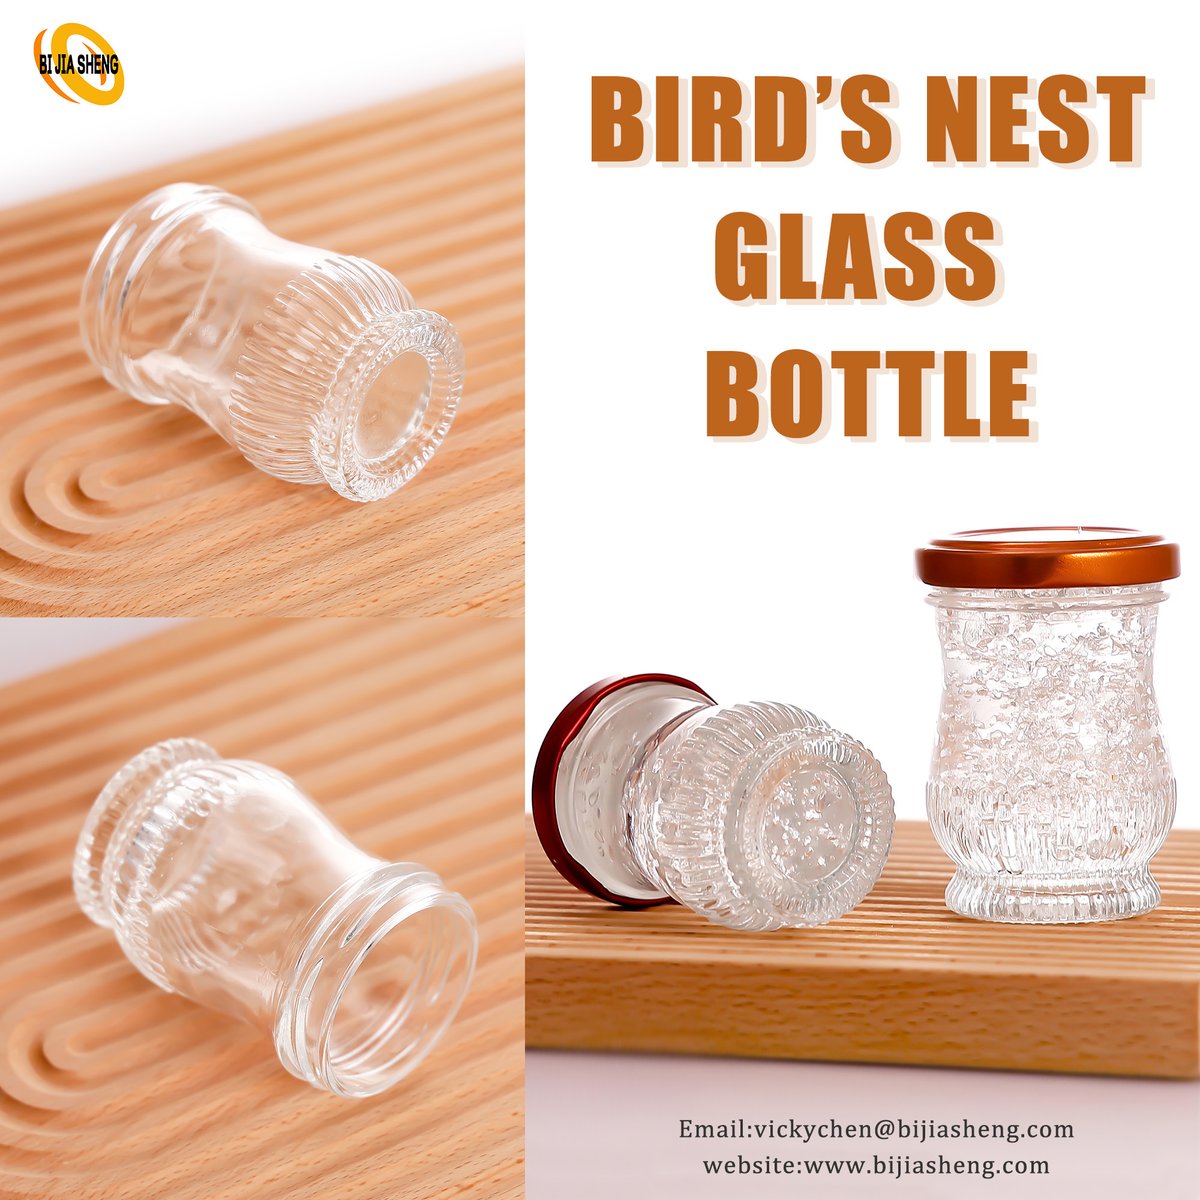 Enhance the quality of your bird's nest products with exquisite glass bottles.💕
Our bird's nest glass bottles are available in a variety of sizes, enhance your brand image with our customization service. 🥳🥳

#FoodPackaging #BirdsNest #yếntổchalo #hũyếntổ #baobìyếntổ